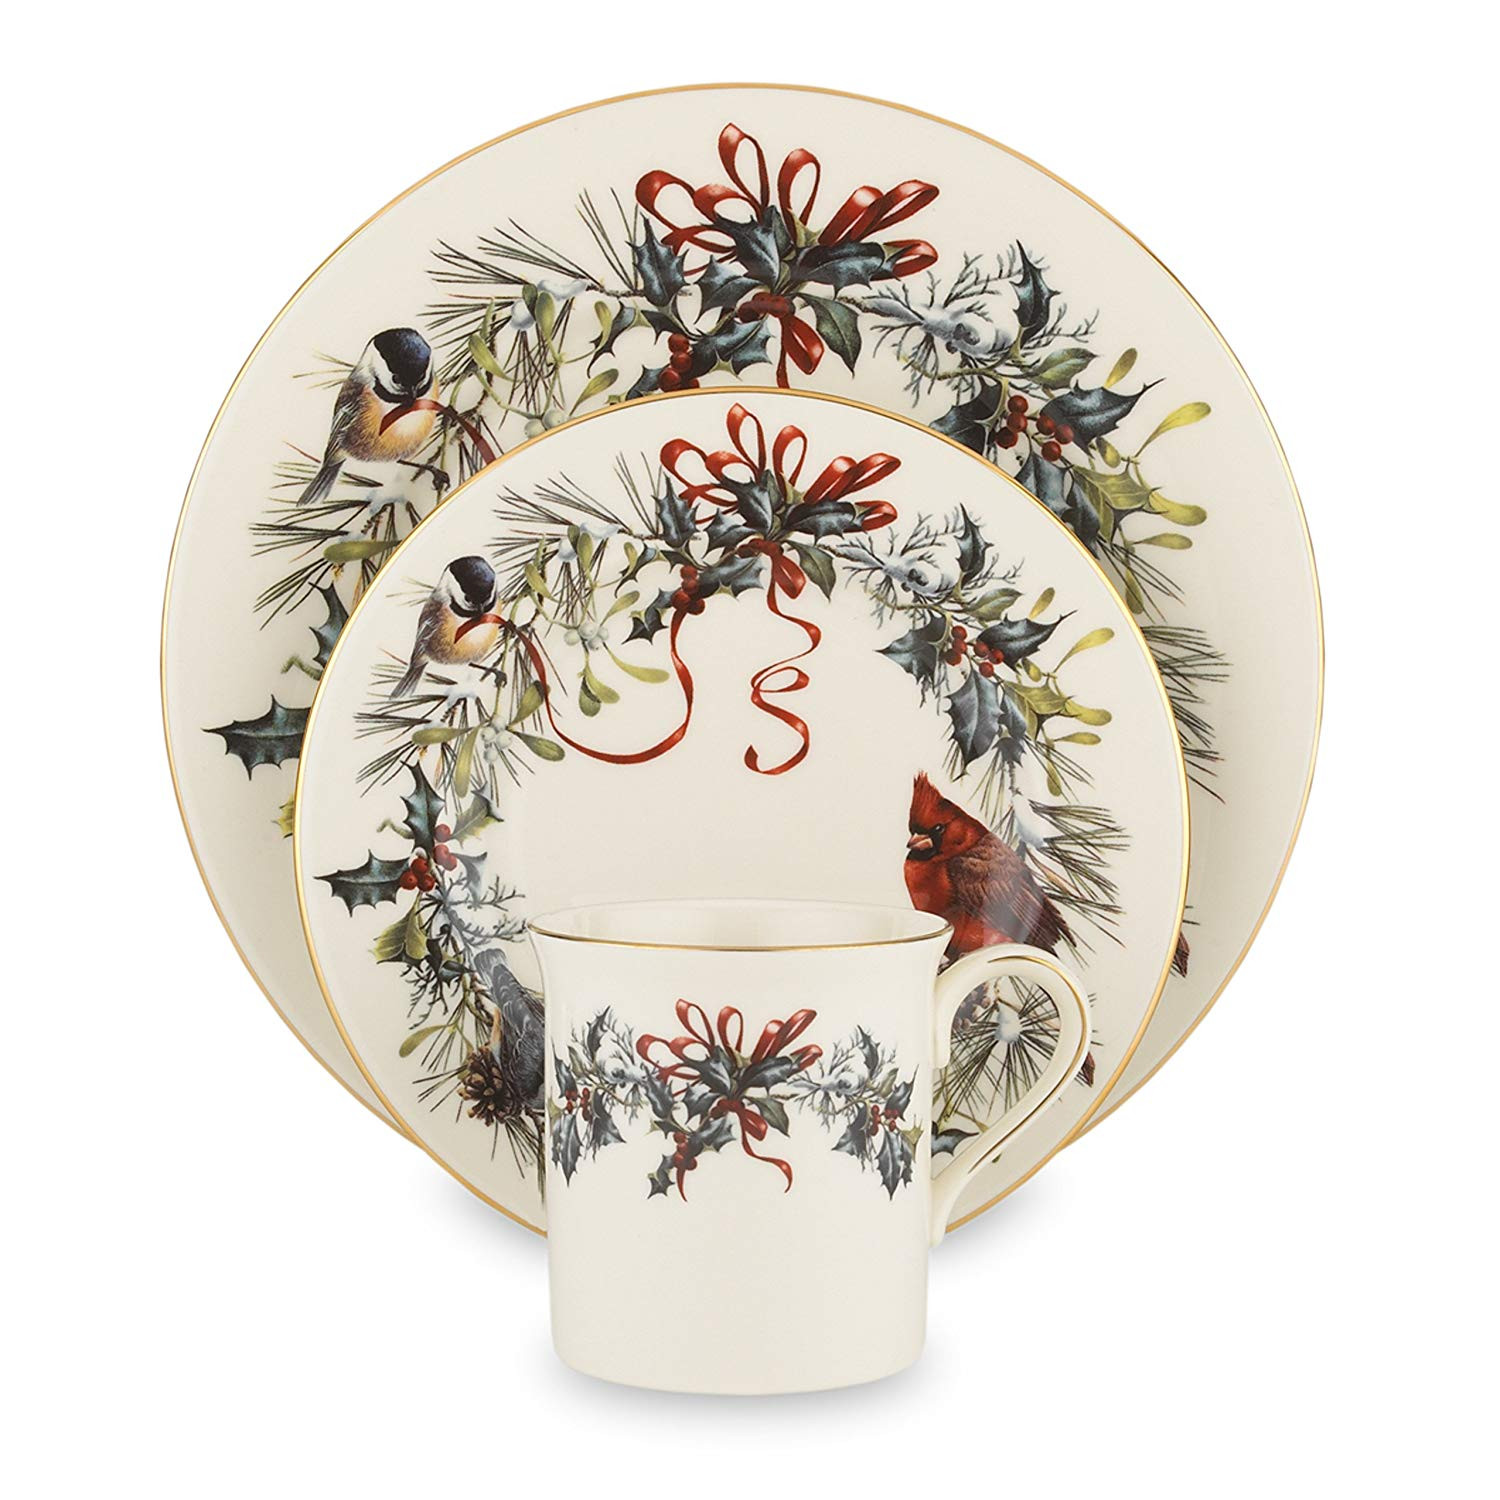 10 Awesome Lenox Holiday Vase 2022 free download lenox holiday vase of amazon com lenox winter greetings 12 piece set christmas dishes pertaining to amazon com lenox winter greetings 12 piece set christmas dishes serving bowls